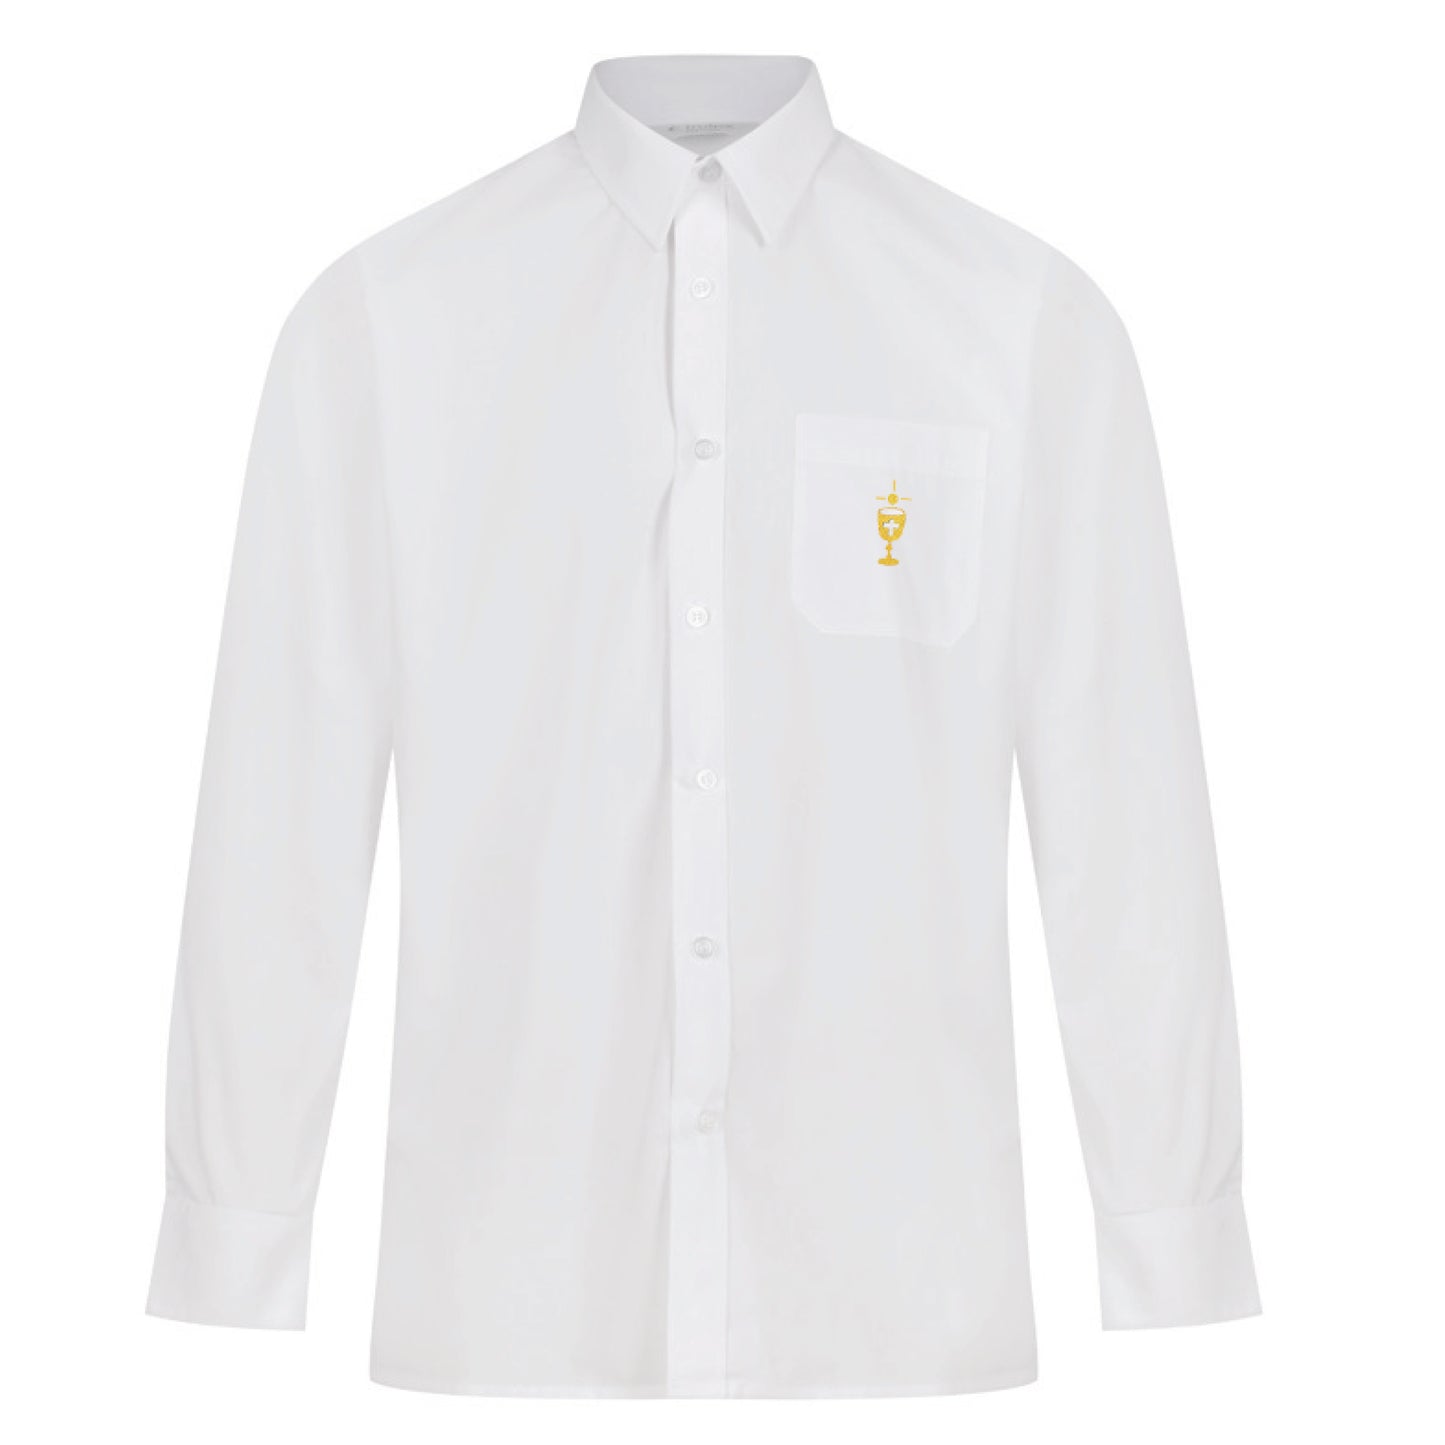 PARKERS OFFICIAL FIRST HOLY COMMUNION EMBROIDERED SHIRT